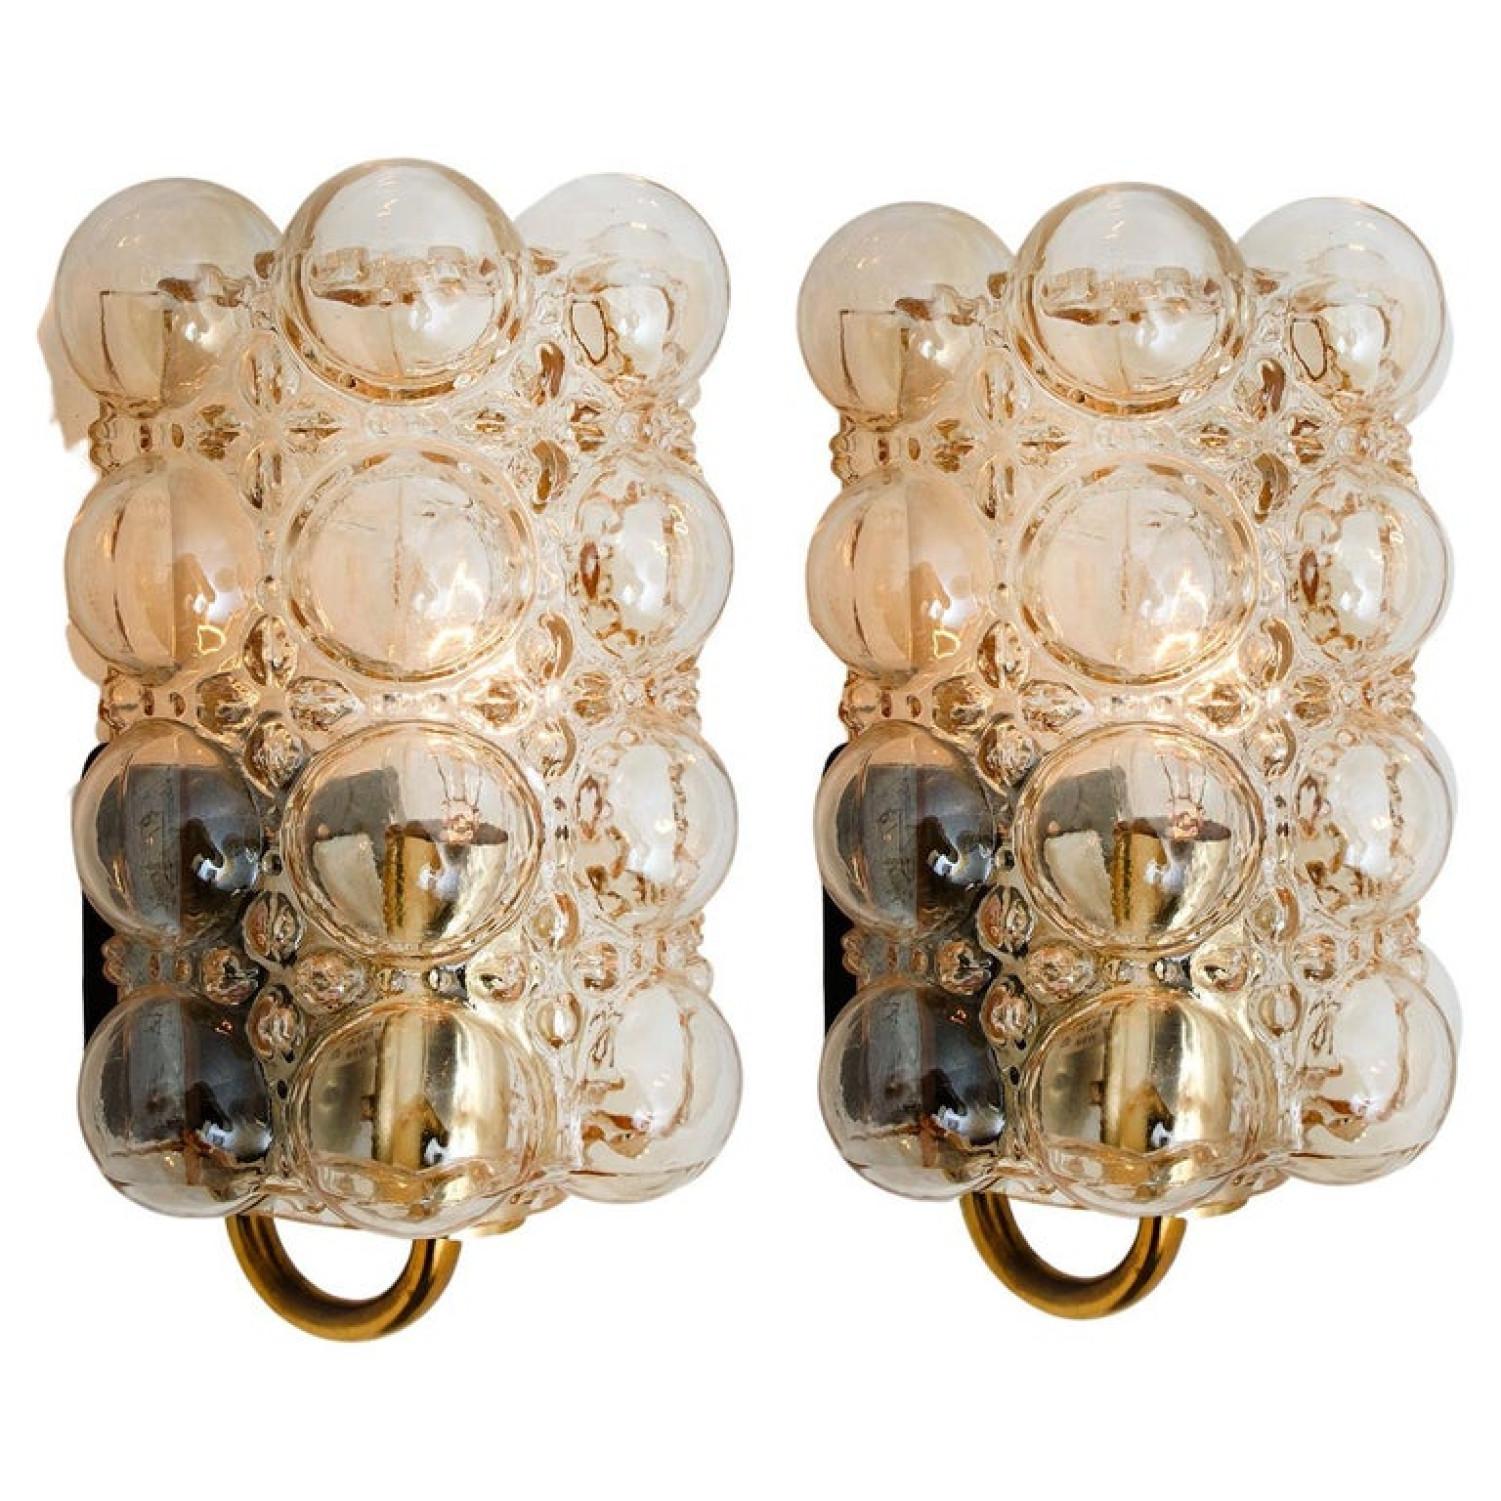 A pair of beautiful bubble glass wall lights designed by Helena Tynell for Glashütte Limburg. A design Classic, the amber colored or toned of the hand blown glass gives a wonderful and warm glow.xa0

Heavy quality and in excellent vintage condition.